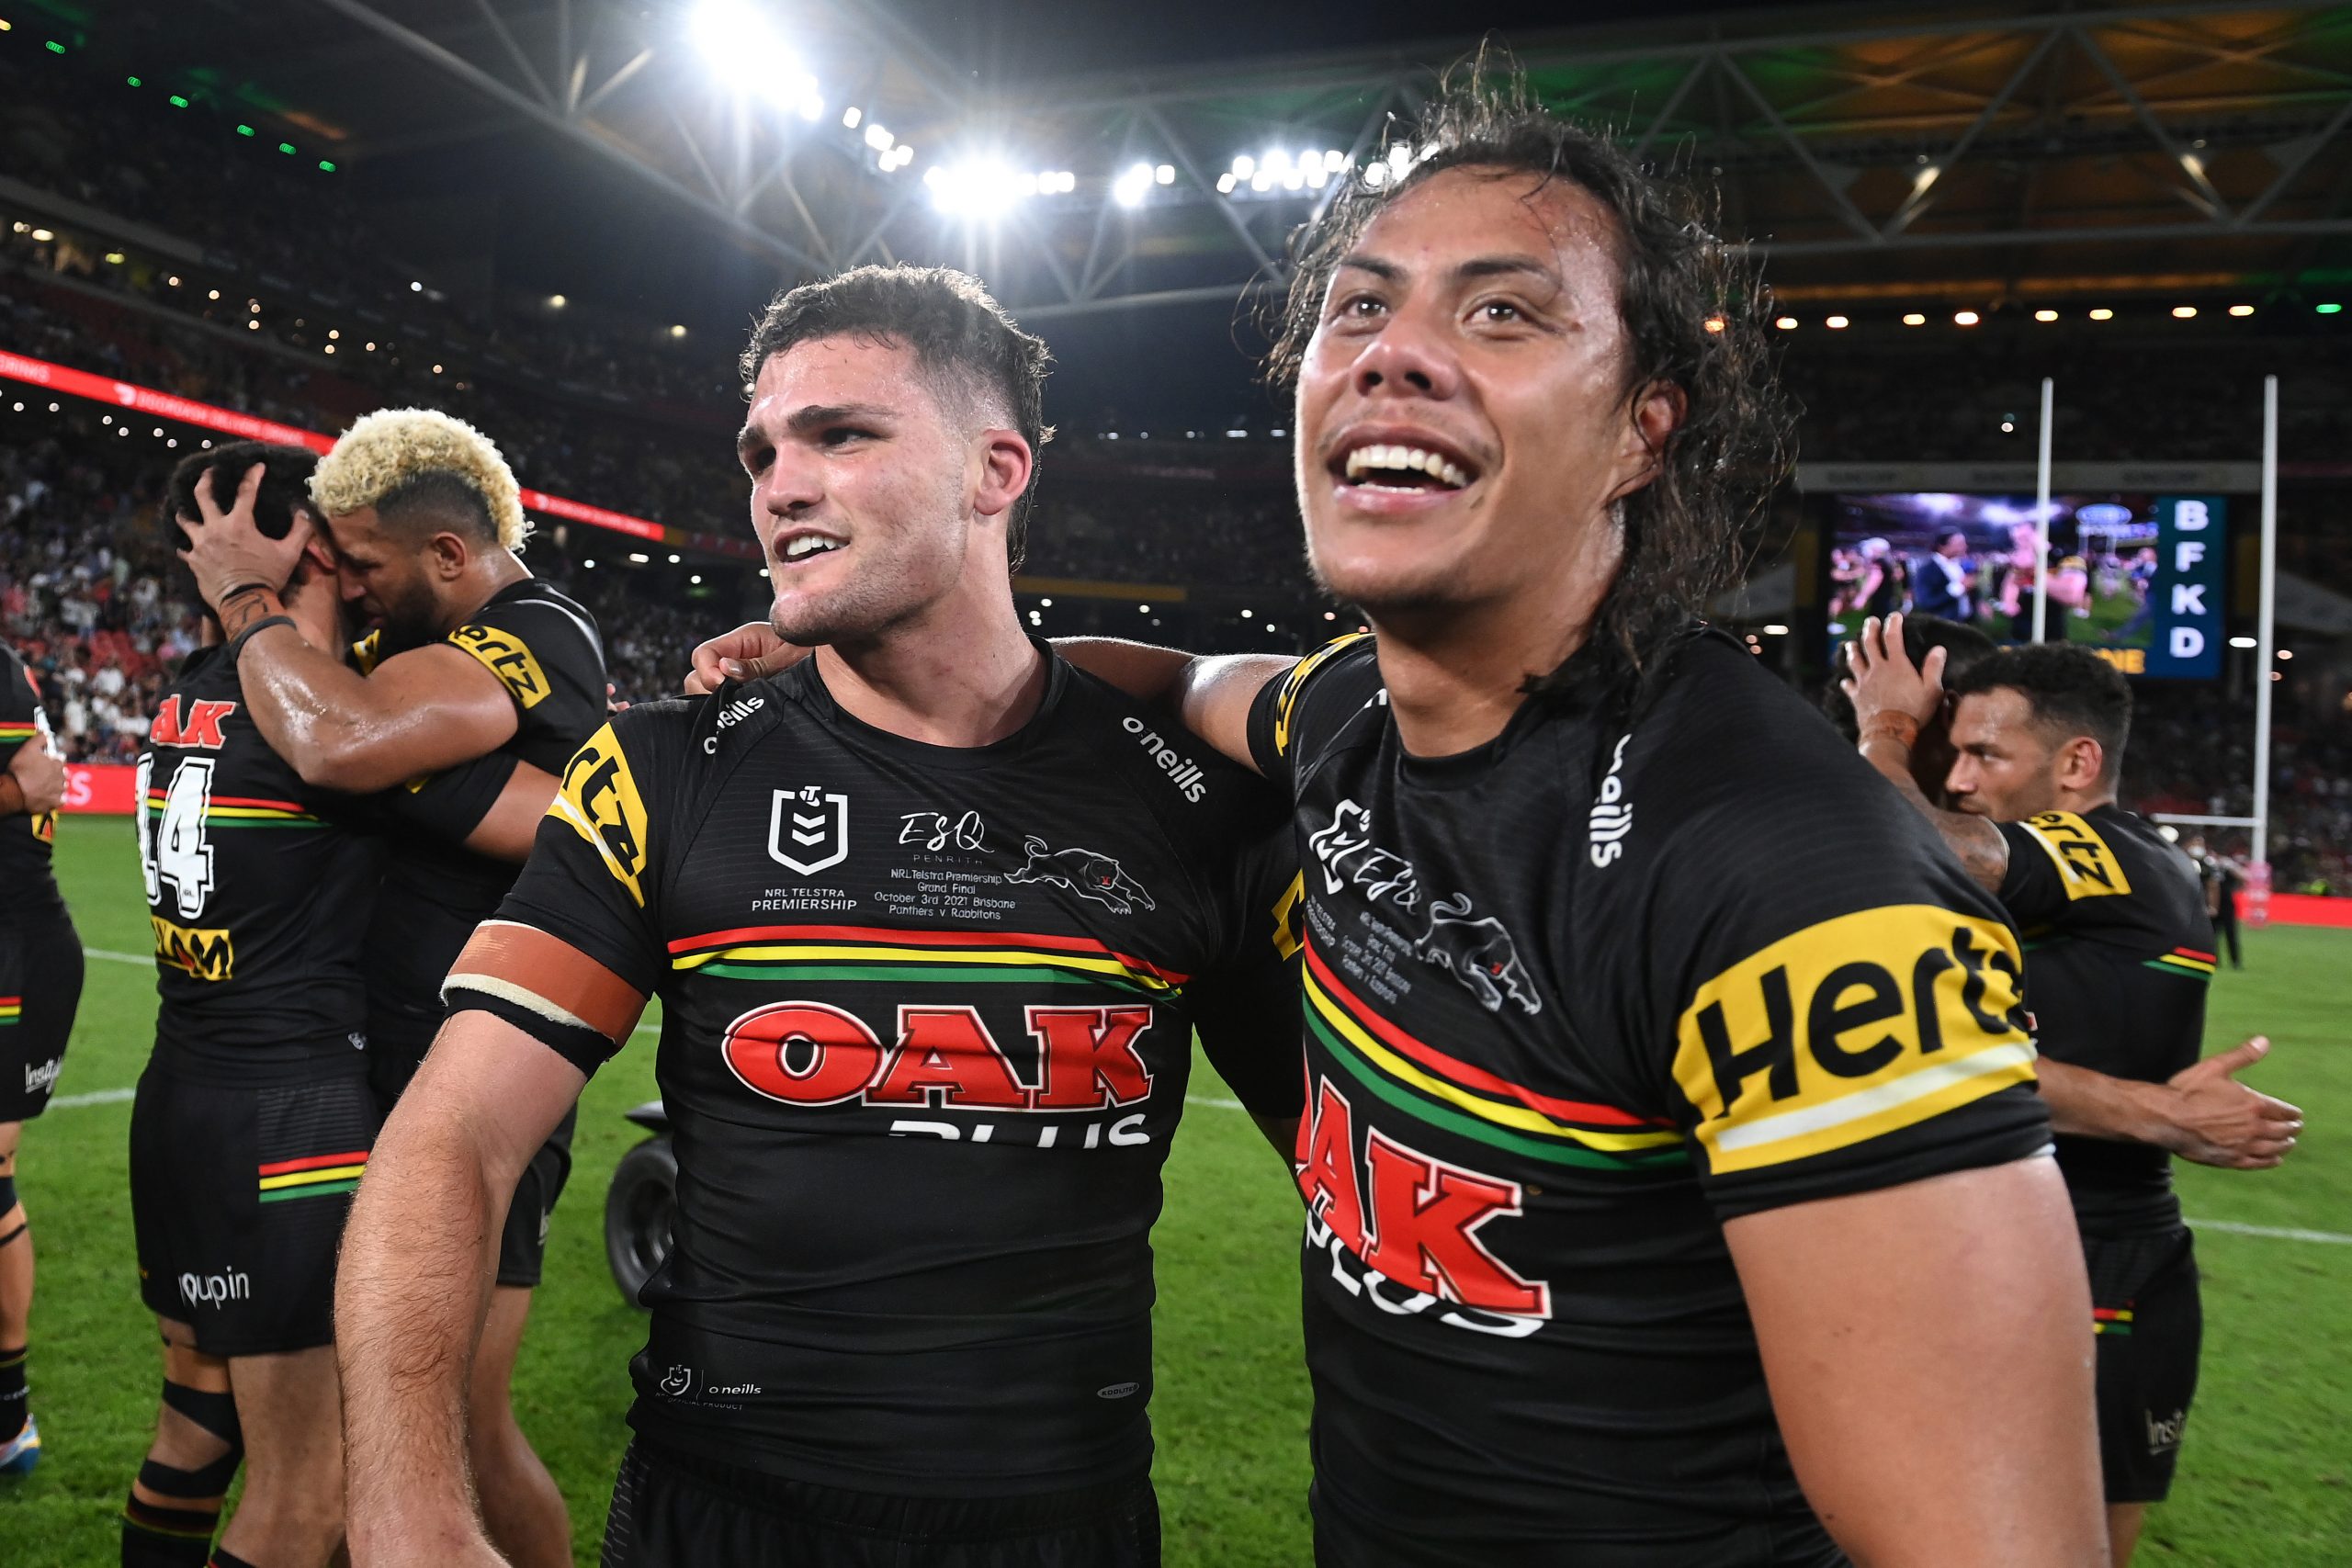 Nathan Cleary of the Panthers and Jarome Luai of the Panthers celebrate winning the 2021 NRL Grand Final match between the Penrith Panthers and the South Sydney Rabbitohs at Suncorp Stadium on October 03, 2021, in Brisbane, Australia. (Photo by Bradley Kanaris/Getty Images)